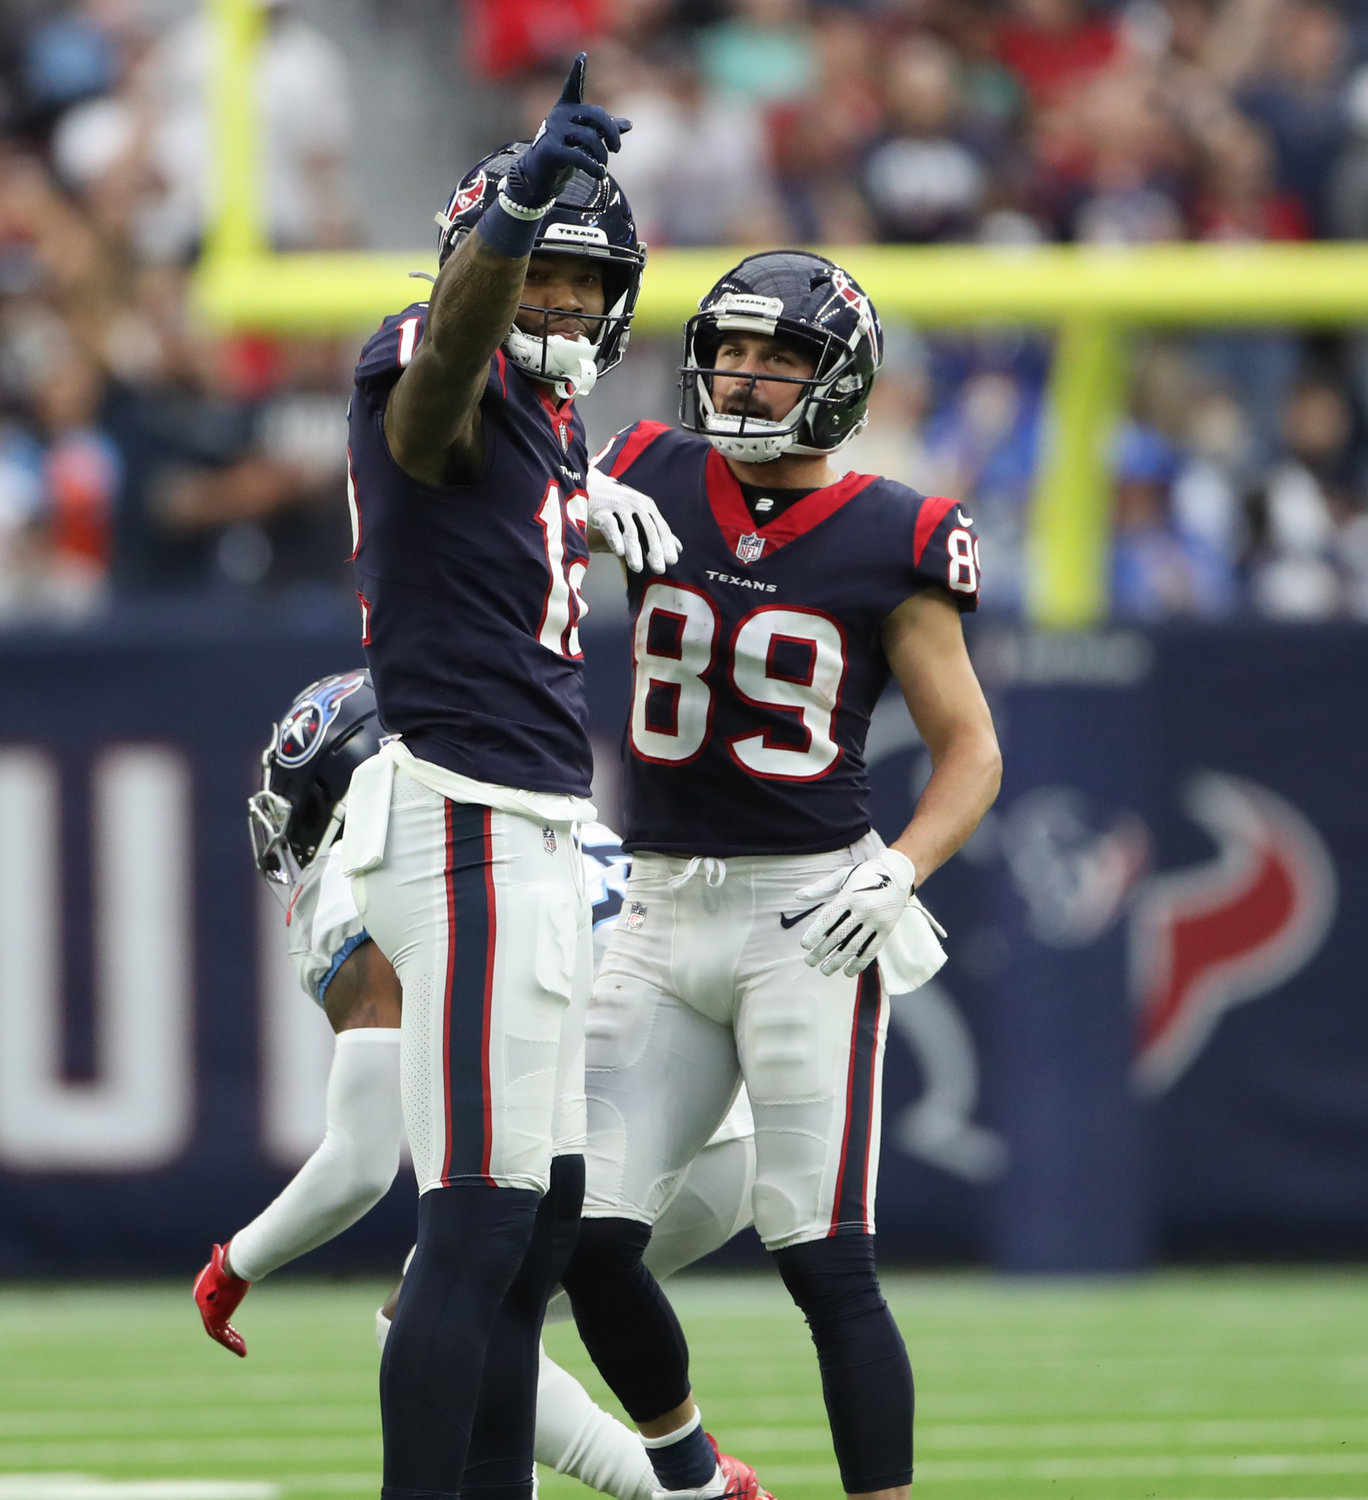 Houston Texans wide receiver Nico Collins (12) gestures after making a catch for a first down during an NFL game between the Texans and the Titans on Jan. 9, 2022 in Houston, Texas. The Titans won, 28-25.